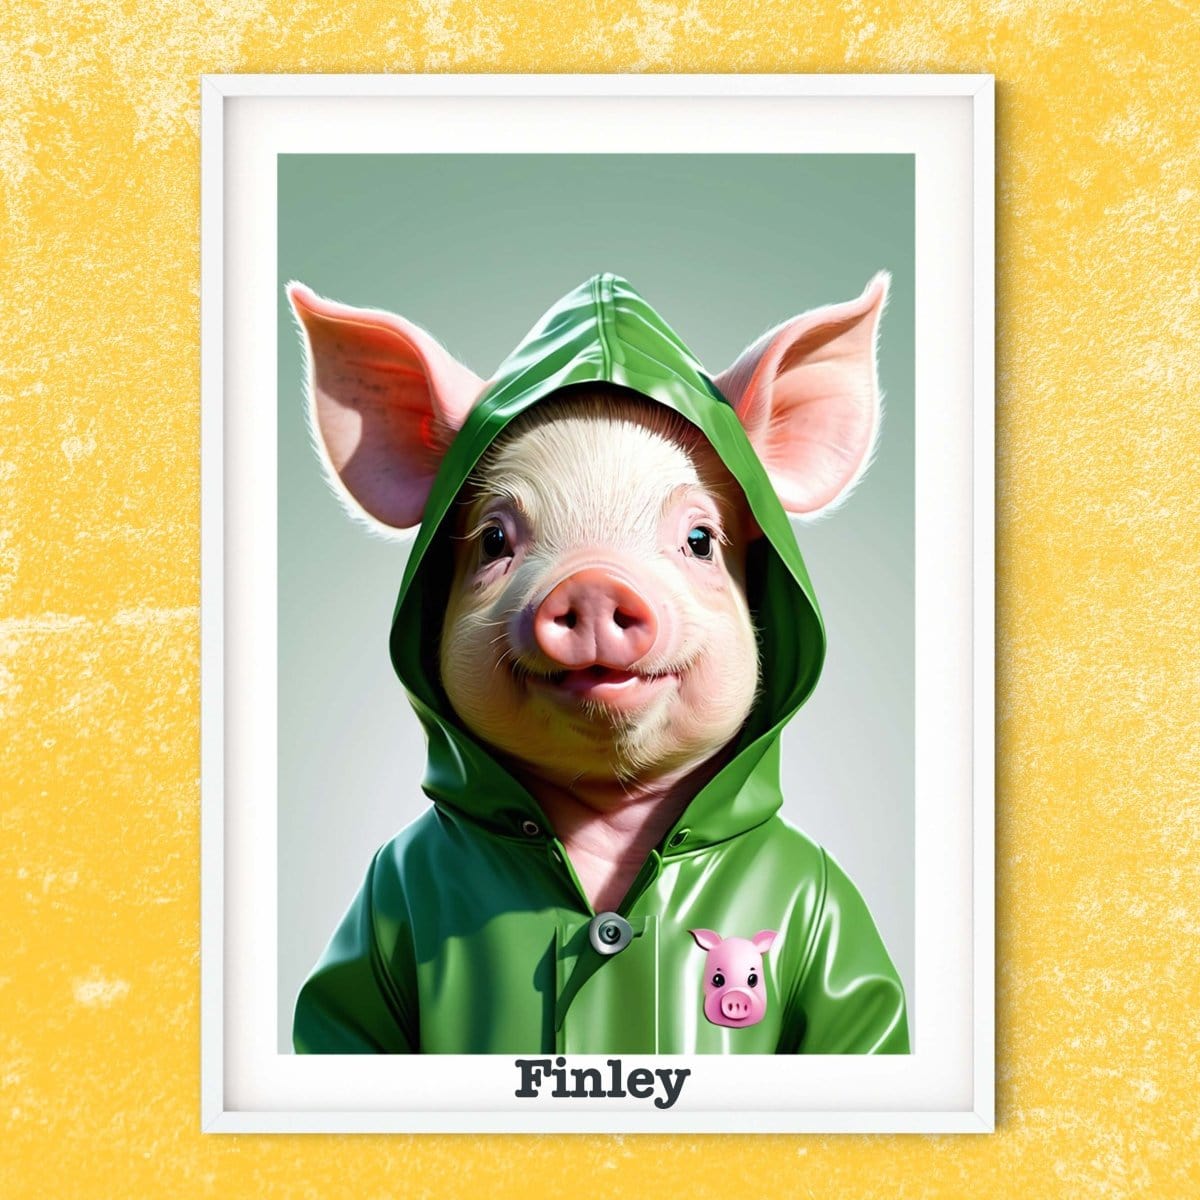 Baby clothed Pigs print, neutral green personalised gifts for kids